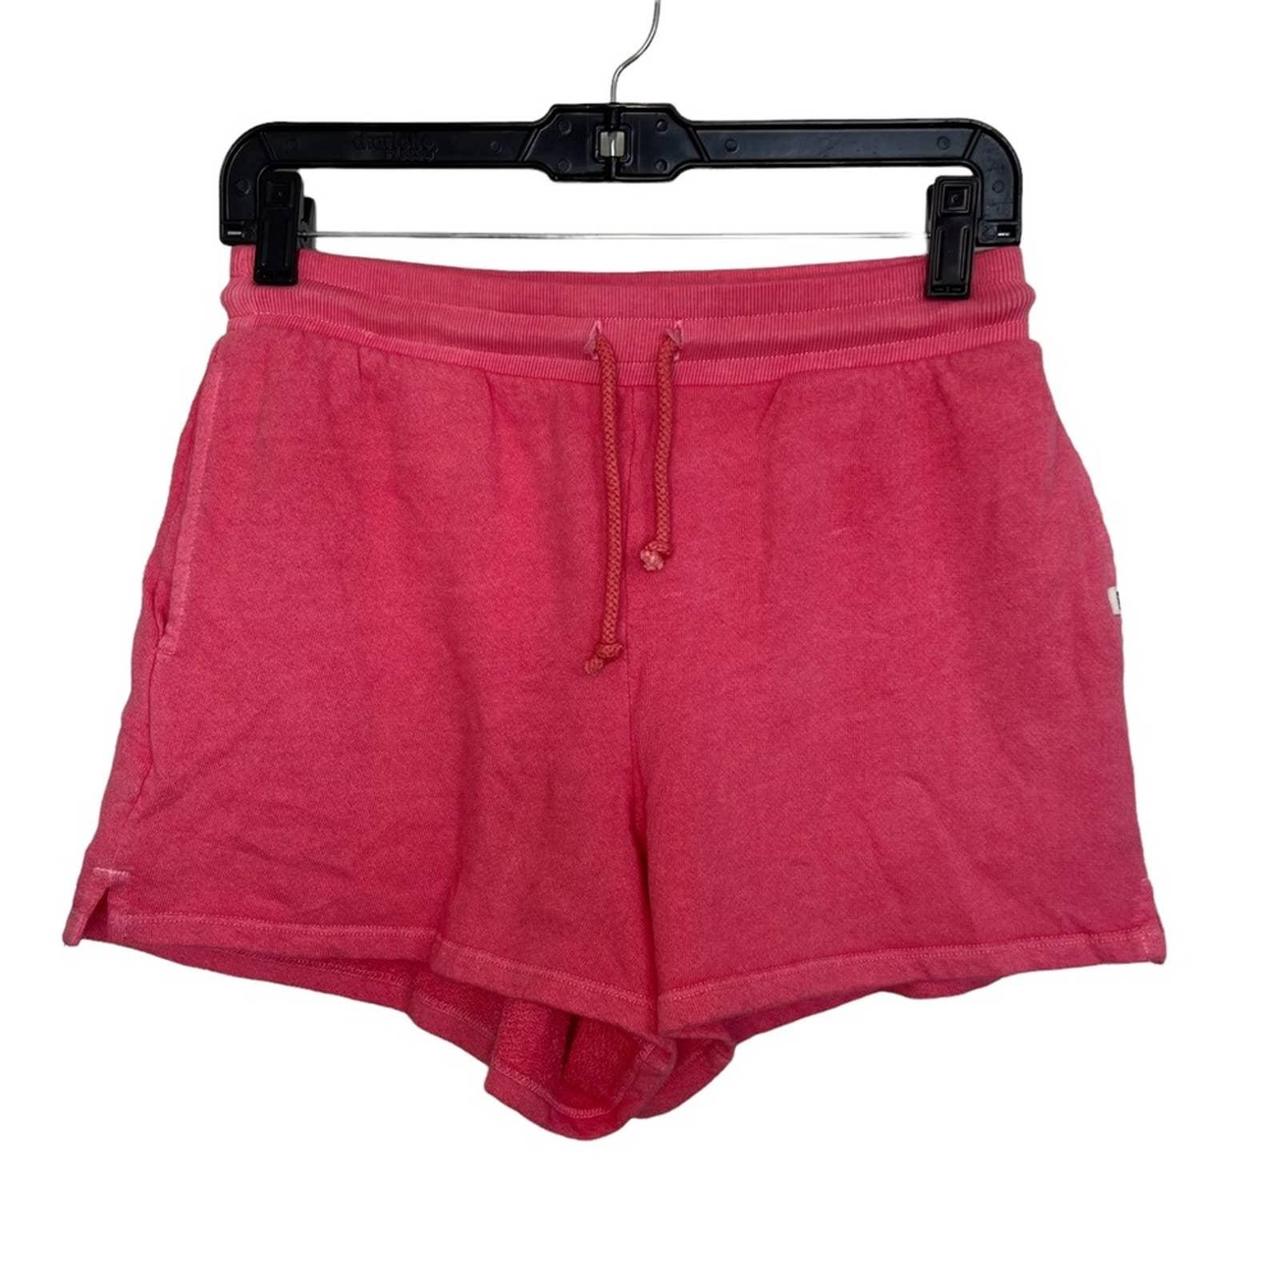 Product Image 1 - New With Tags! Billabong Pink